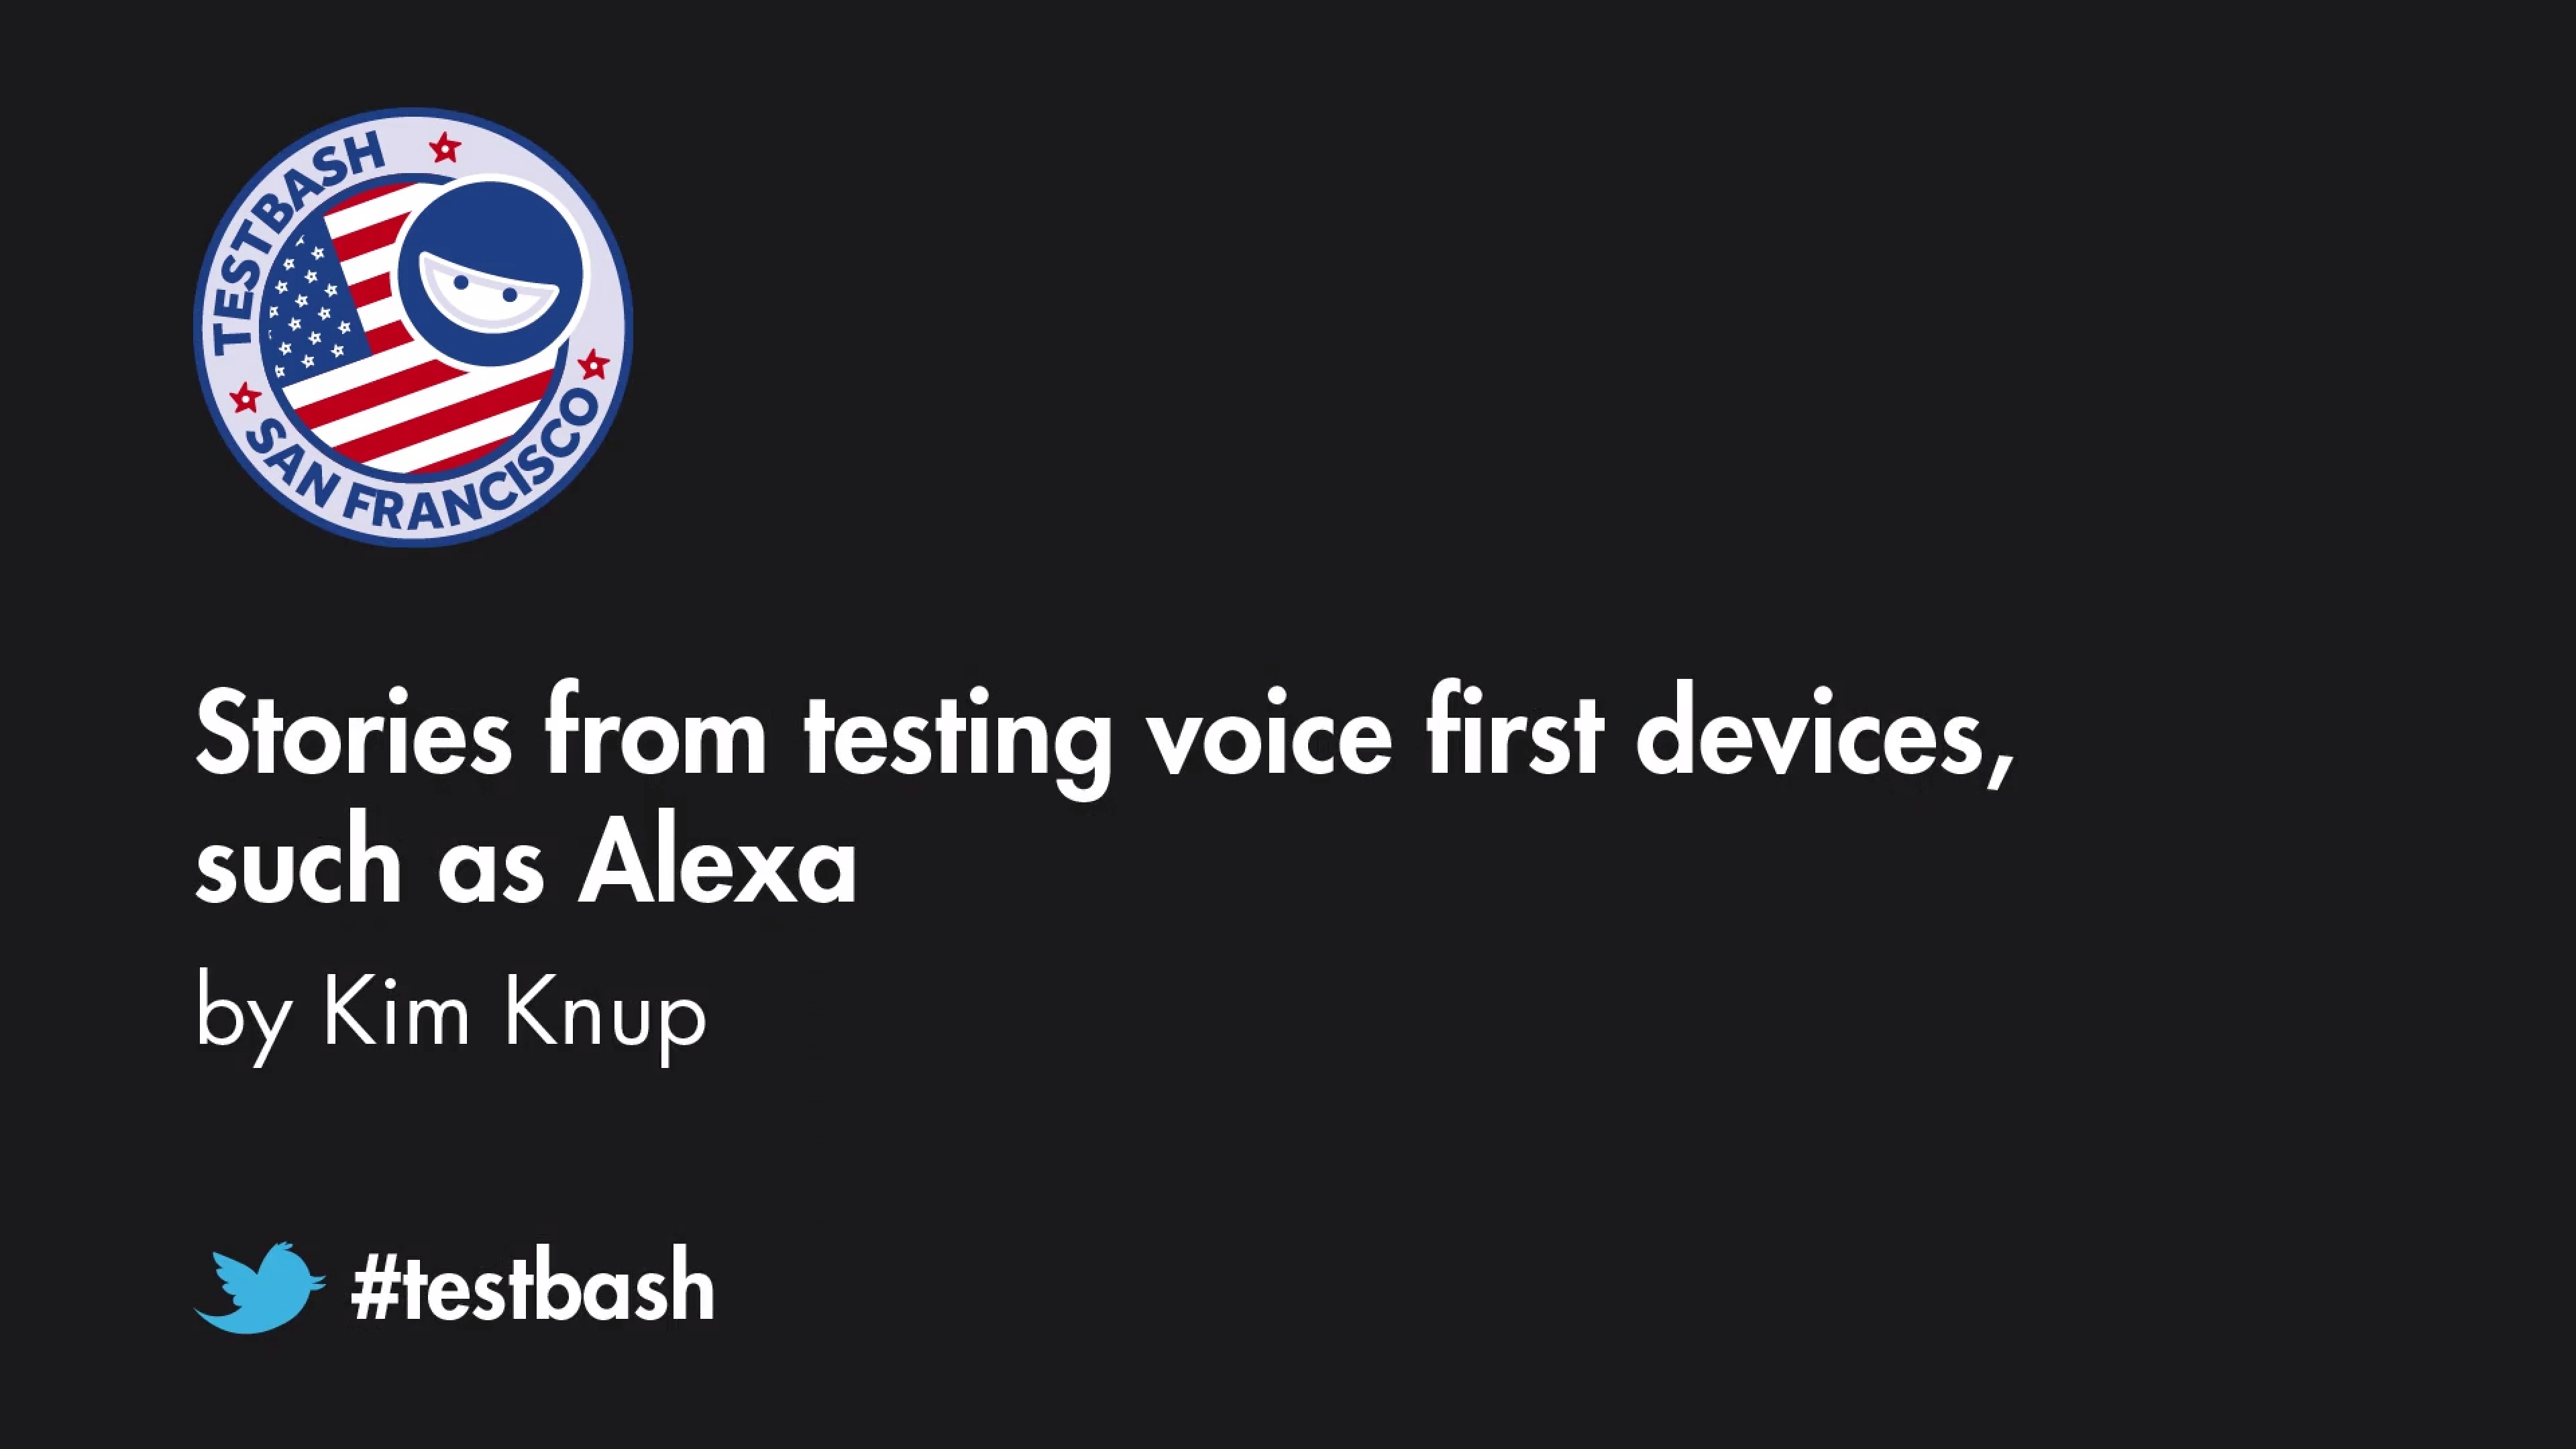 Stories from Testing Voice First Devices, Such as Alexa - Kim Knup